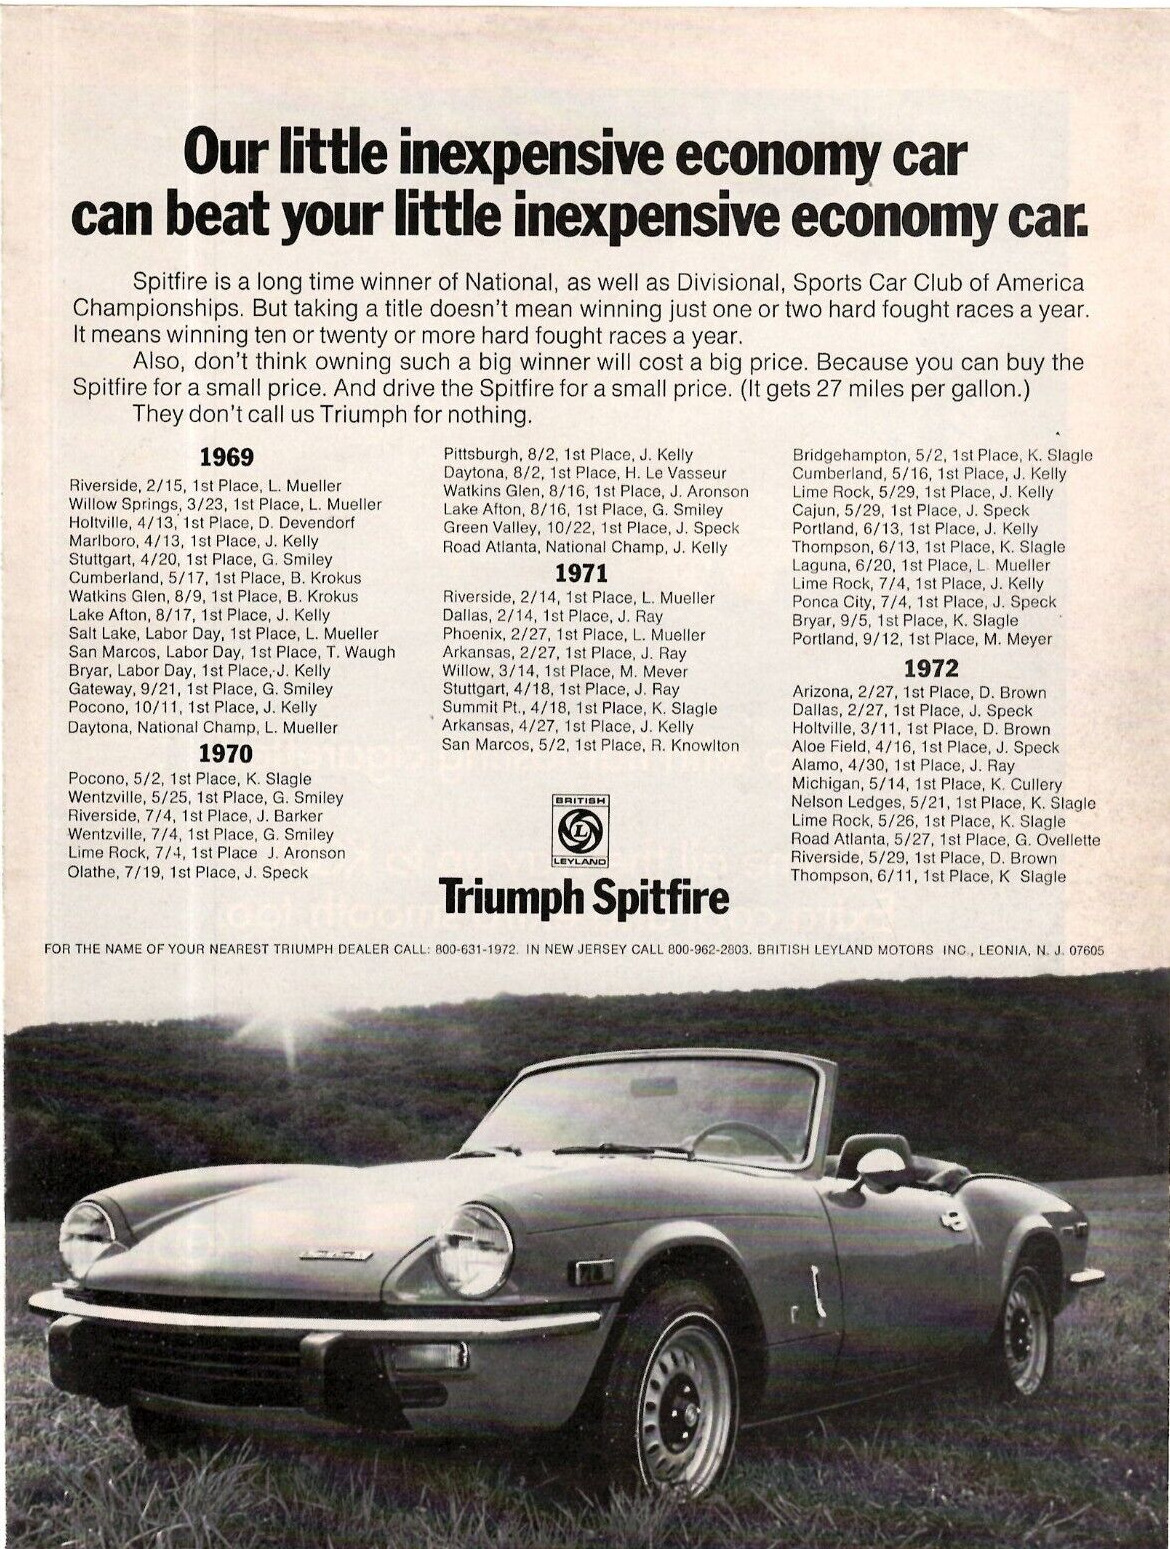 1972 Print Ad Triumph Spitfire Our Little Inexpensive Economy Car Can Beat Your